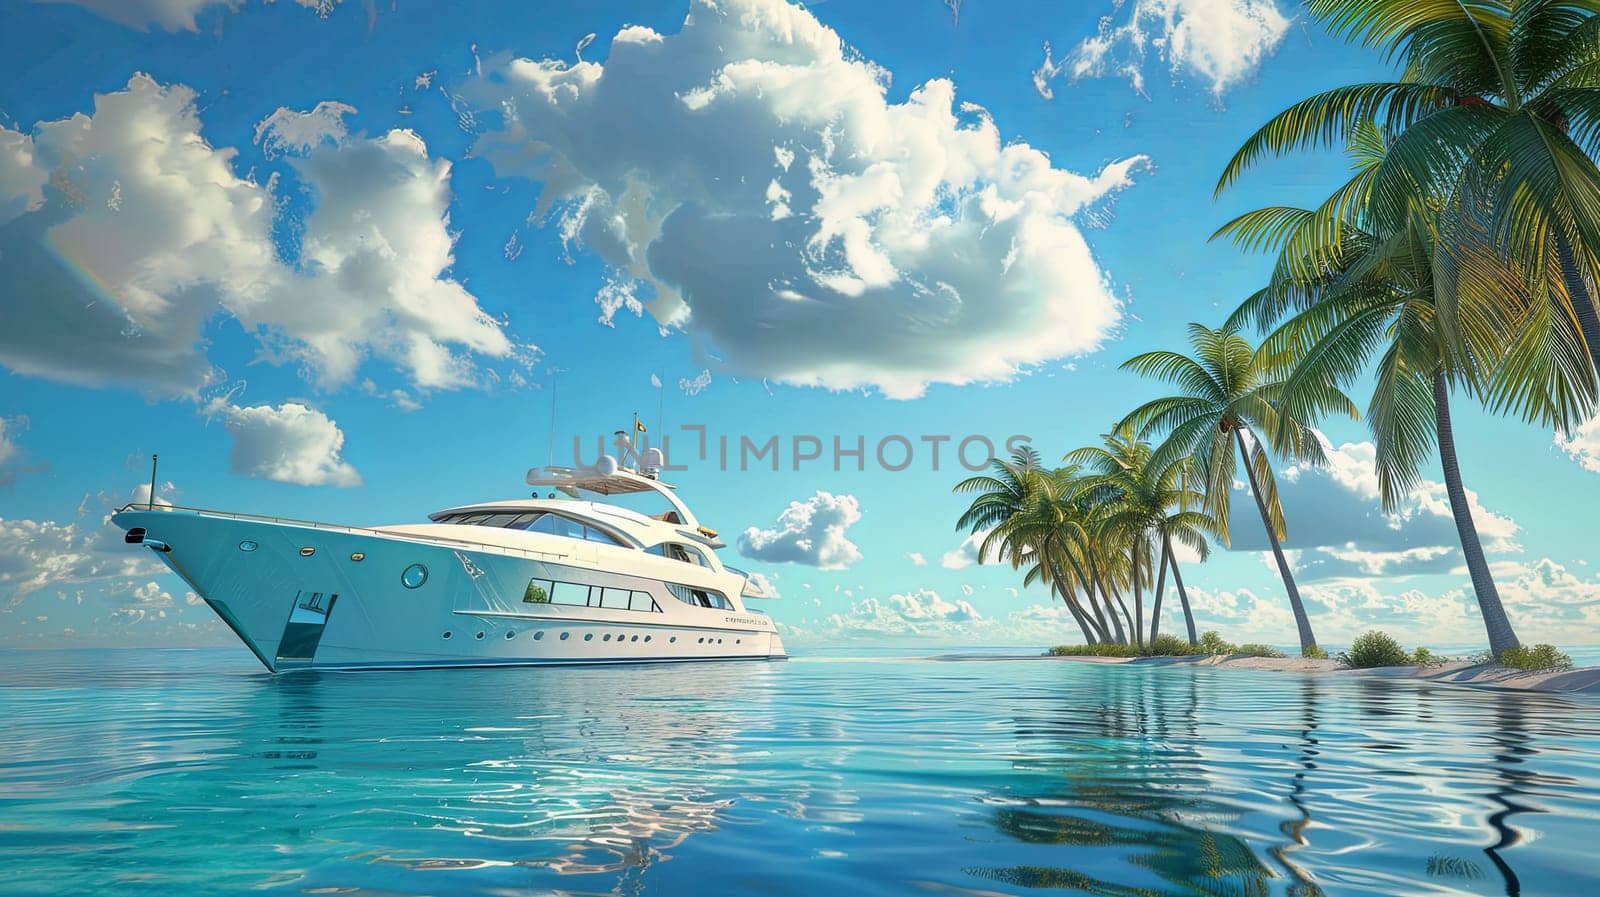 A grand, white yacht gracefully glides through a tranquil lagoon, surrounded by lush palm trees and clear waters.